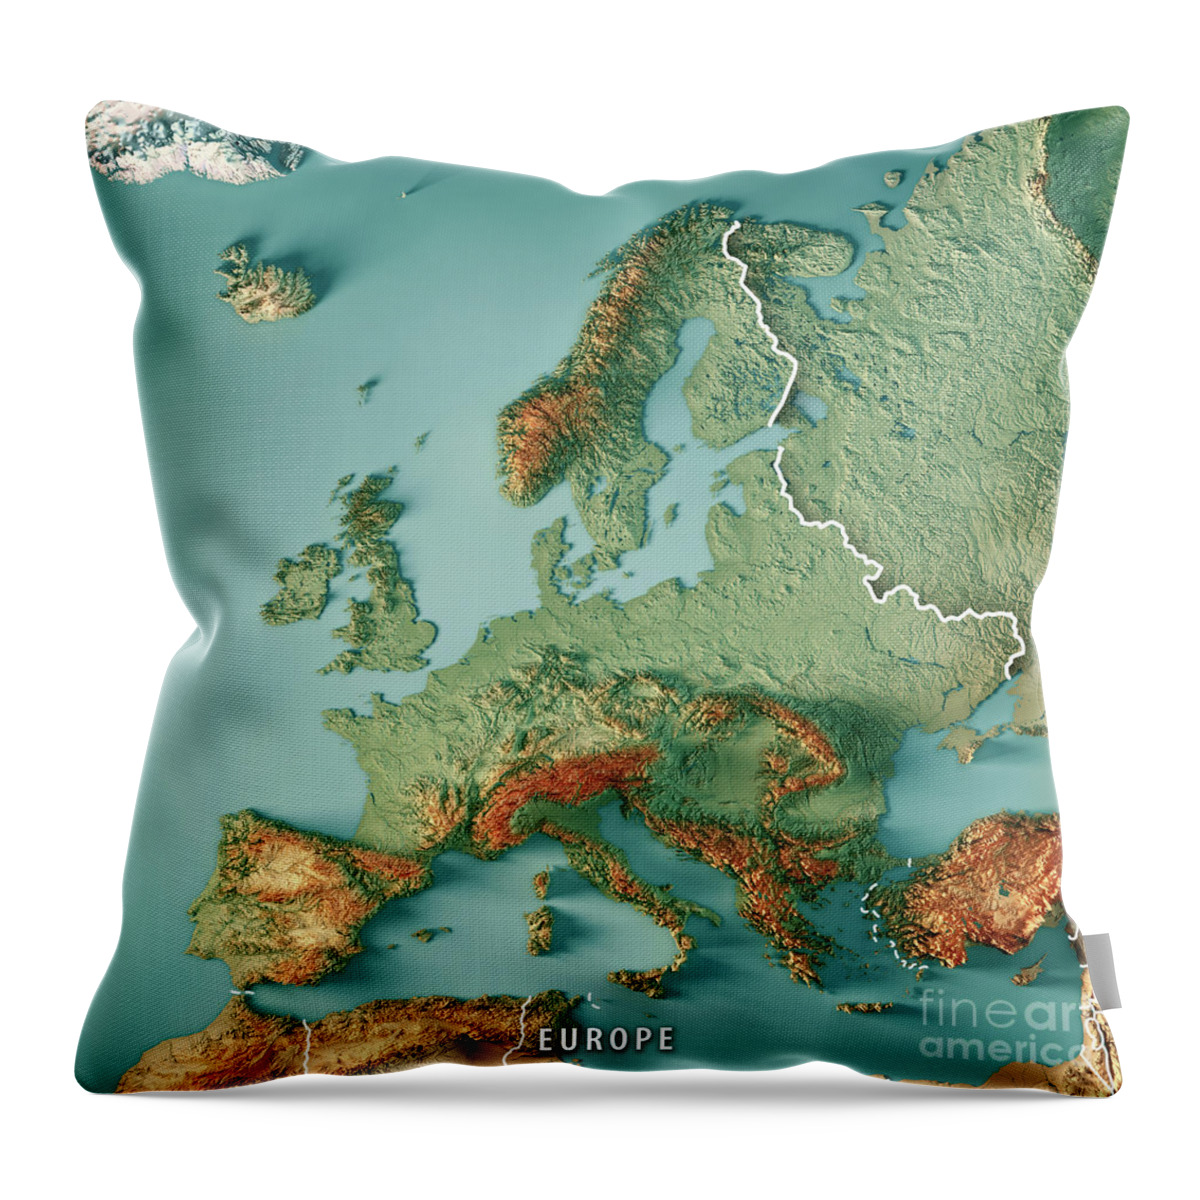 Europe Throw Pillow featuring the digital art Europe 3D Render Topographic Map Color Border by Frank Ramspott